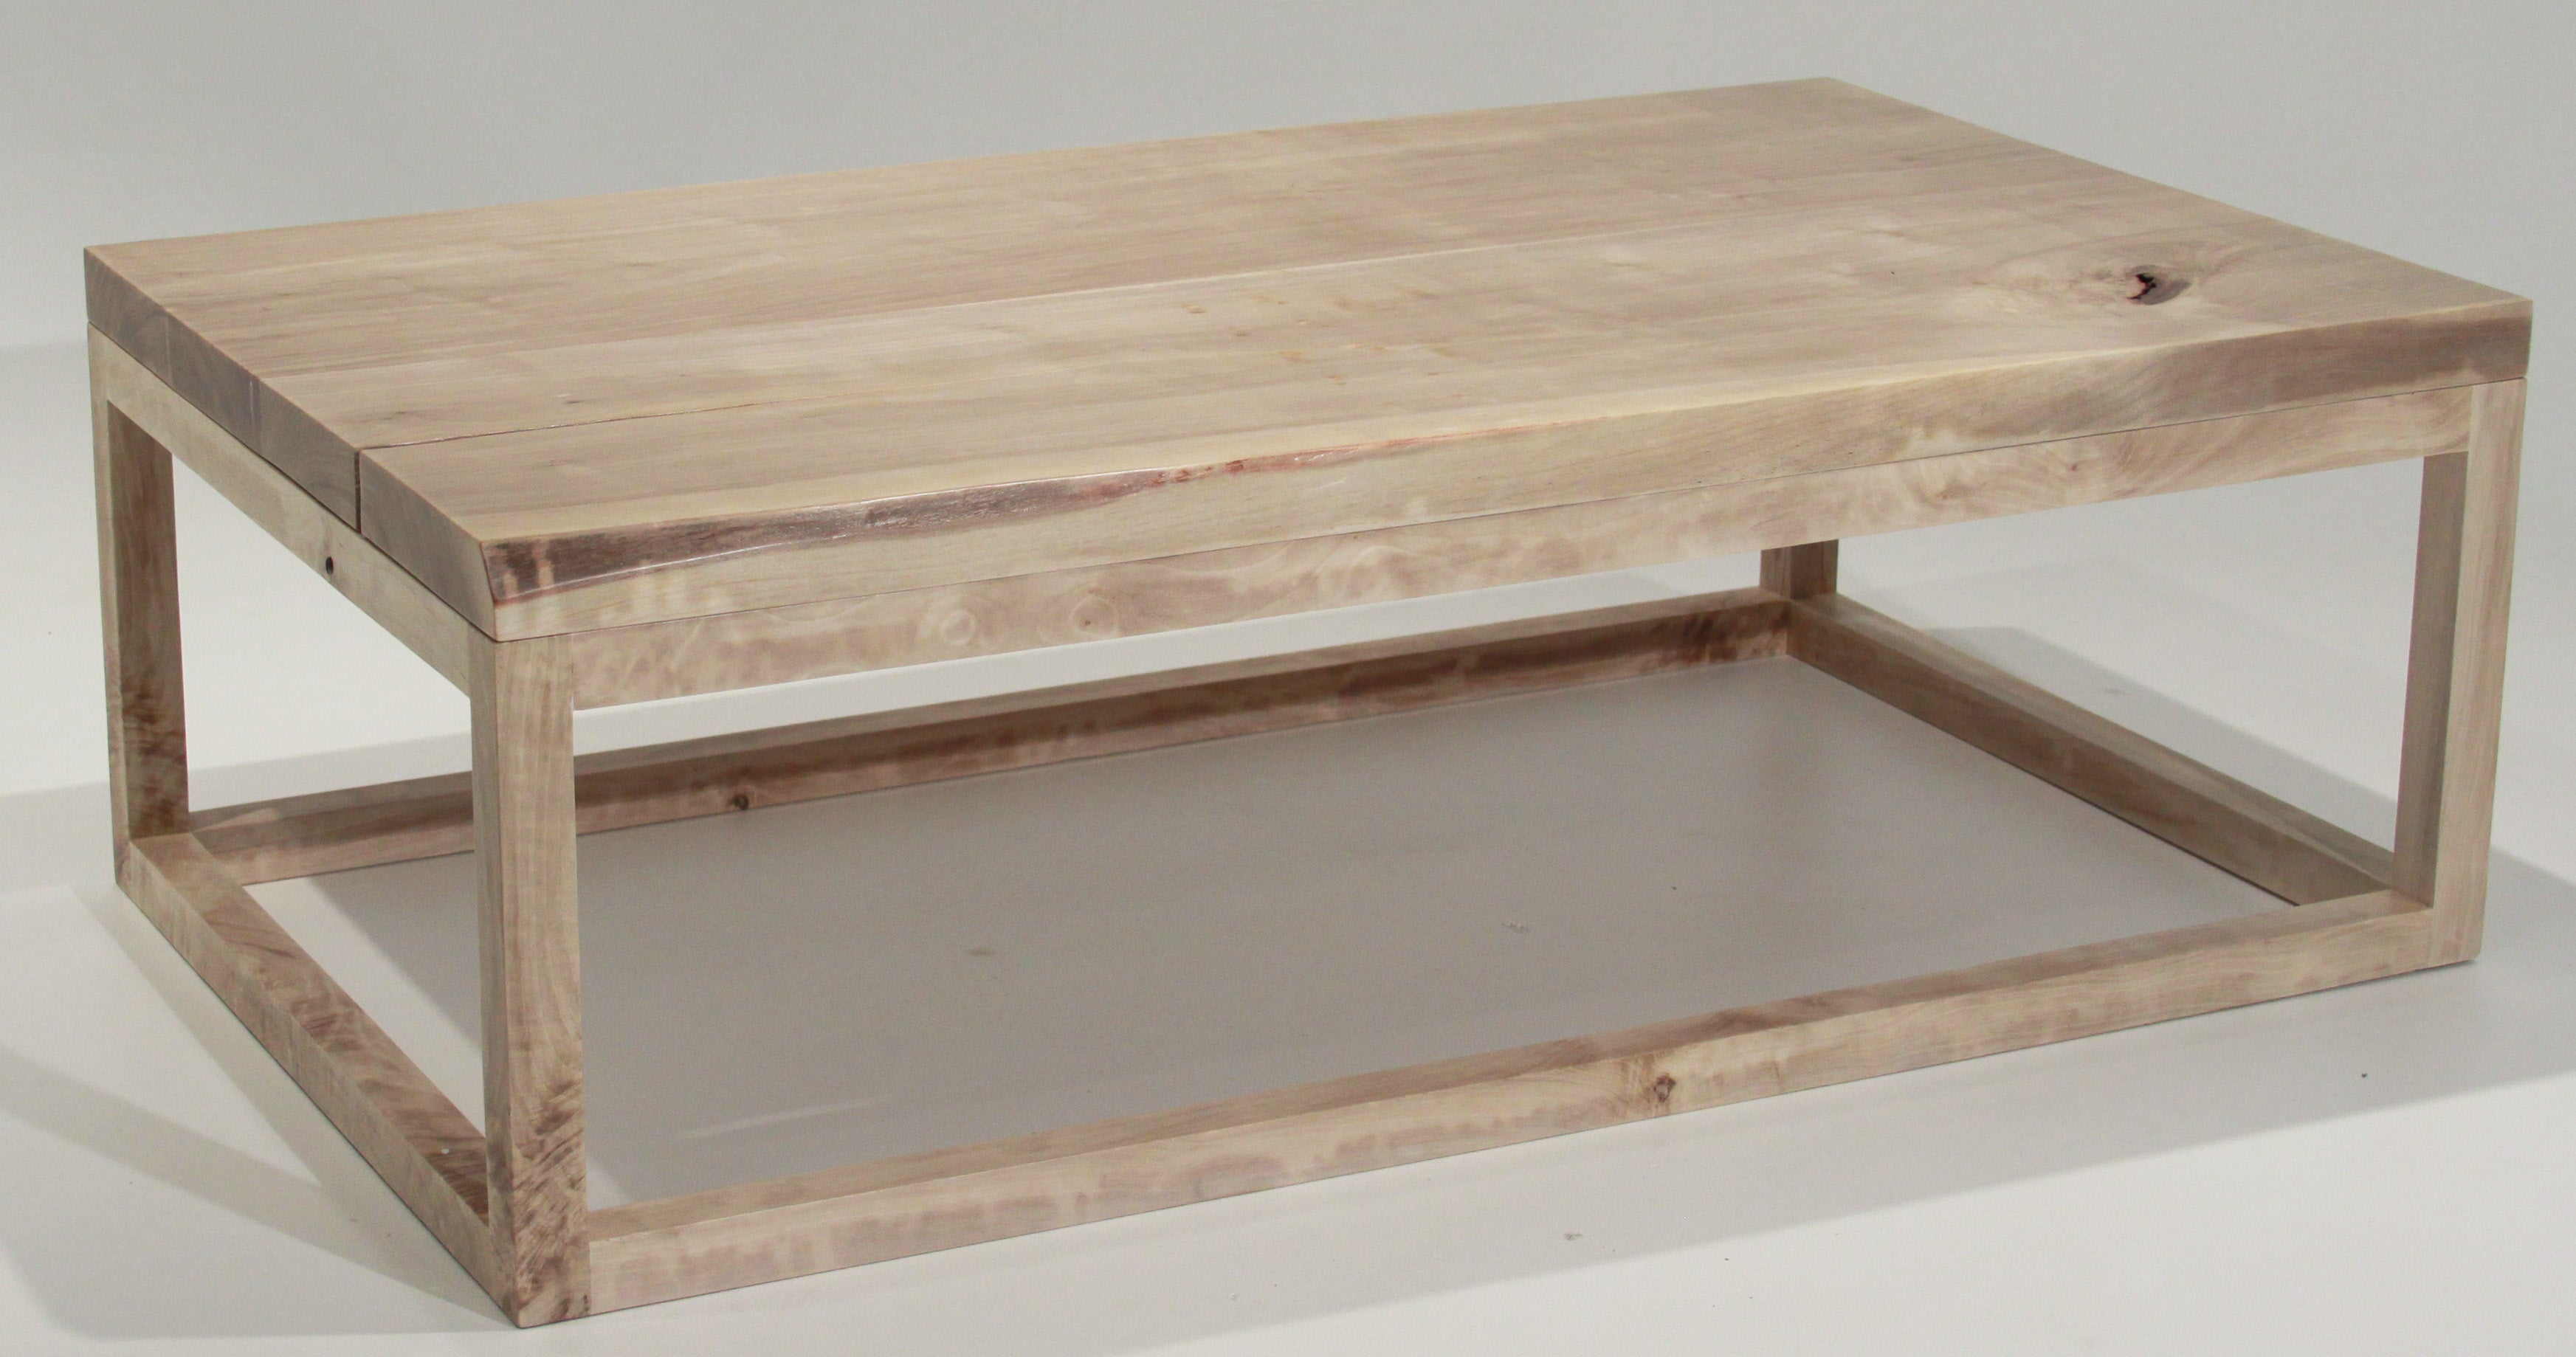 The Basic Coffee Table in bleached Walnut with live edges by Thomas Hayes Studio